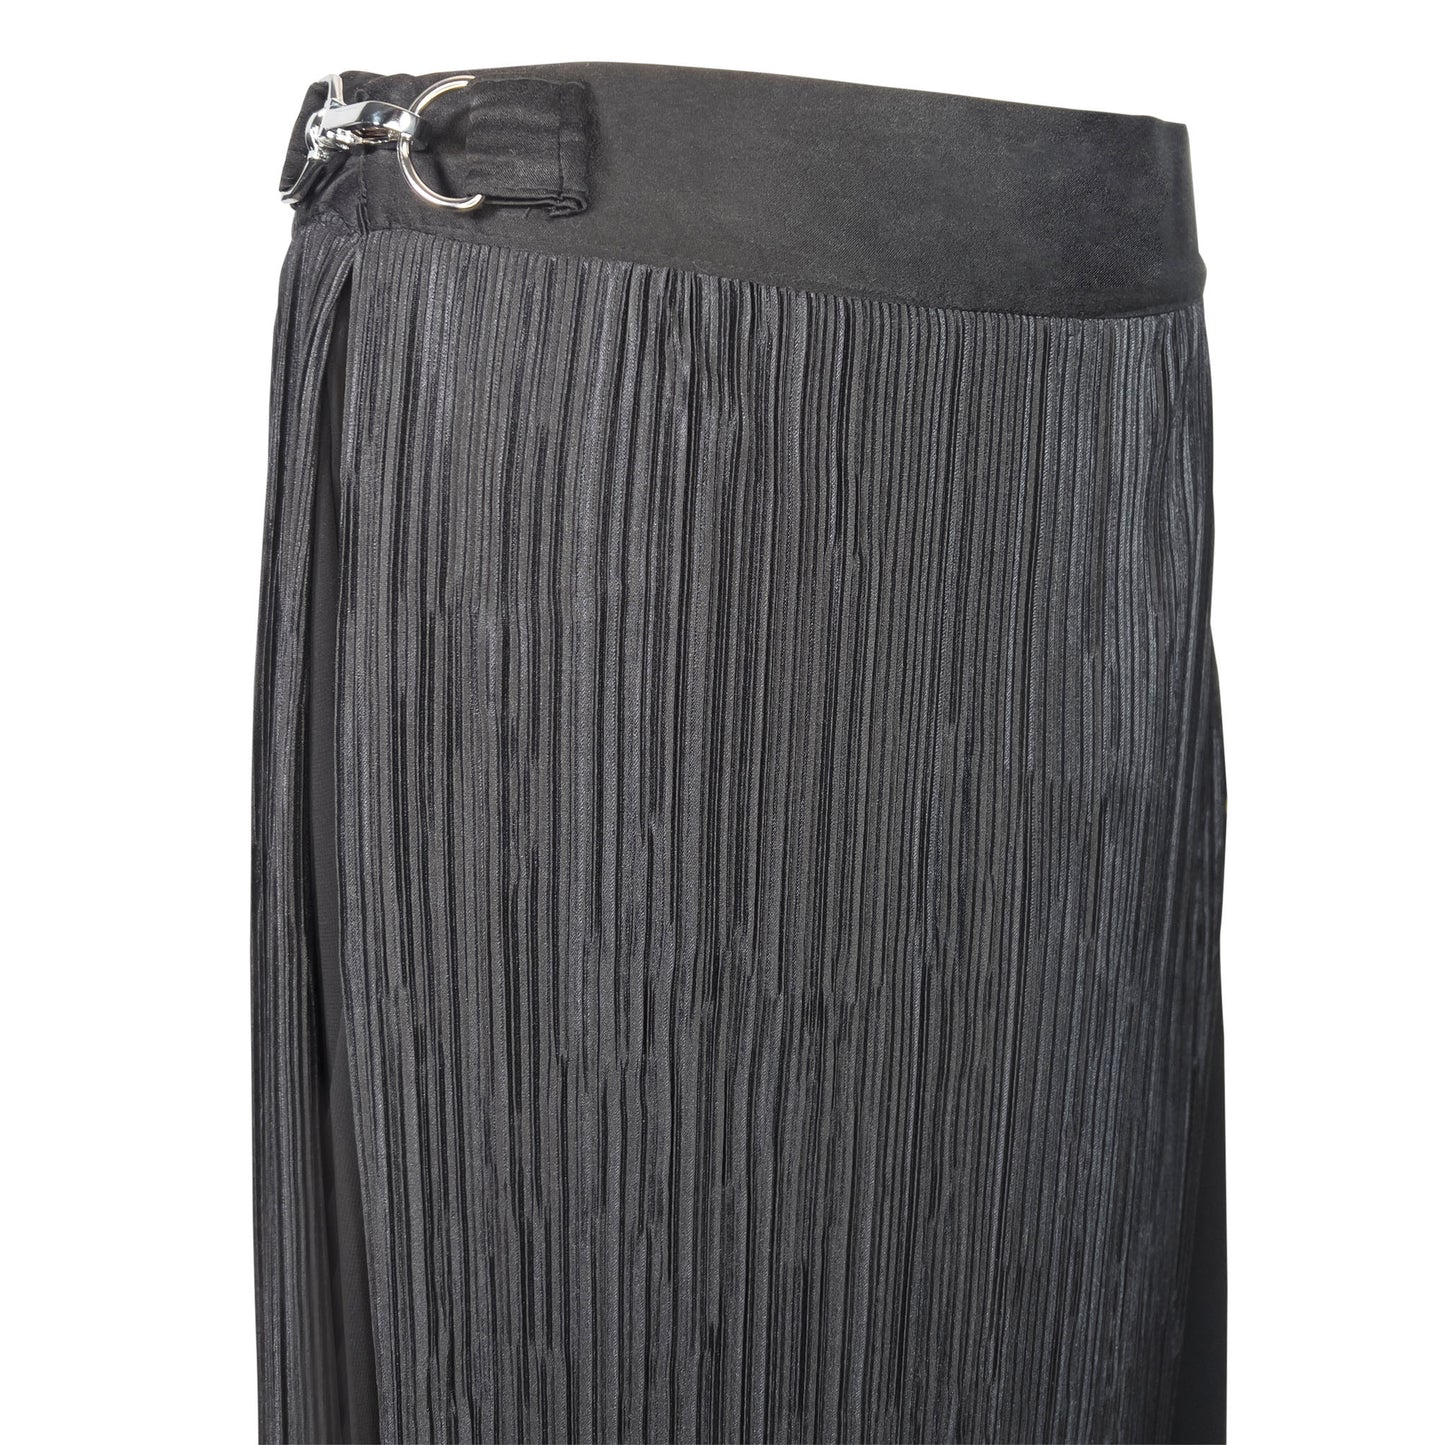 Asymmetrical Paneled Skirt With Side Clasp - LLESSUR NYC